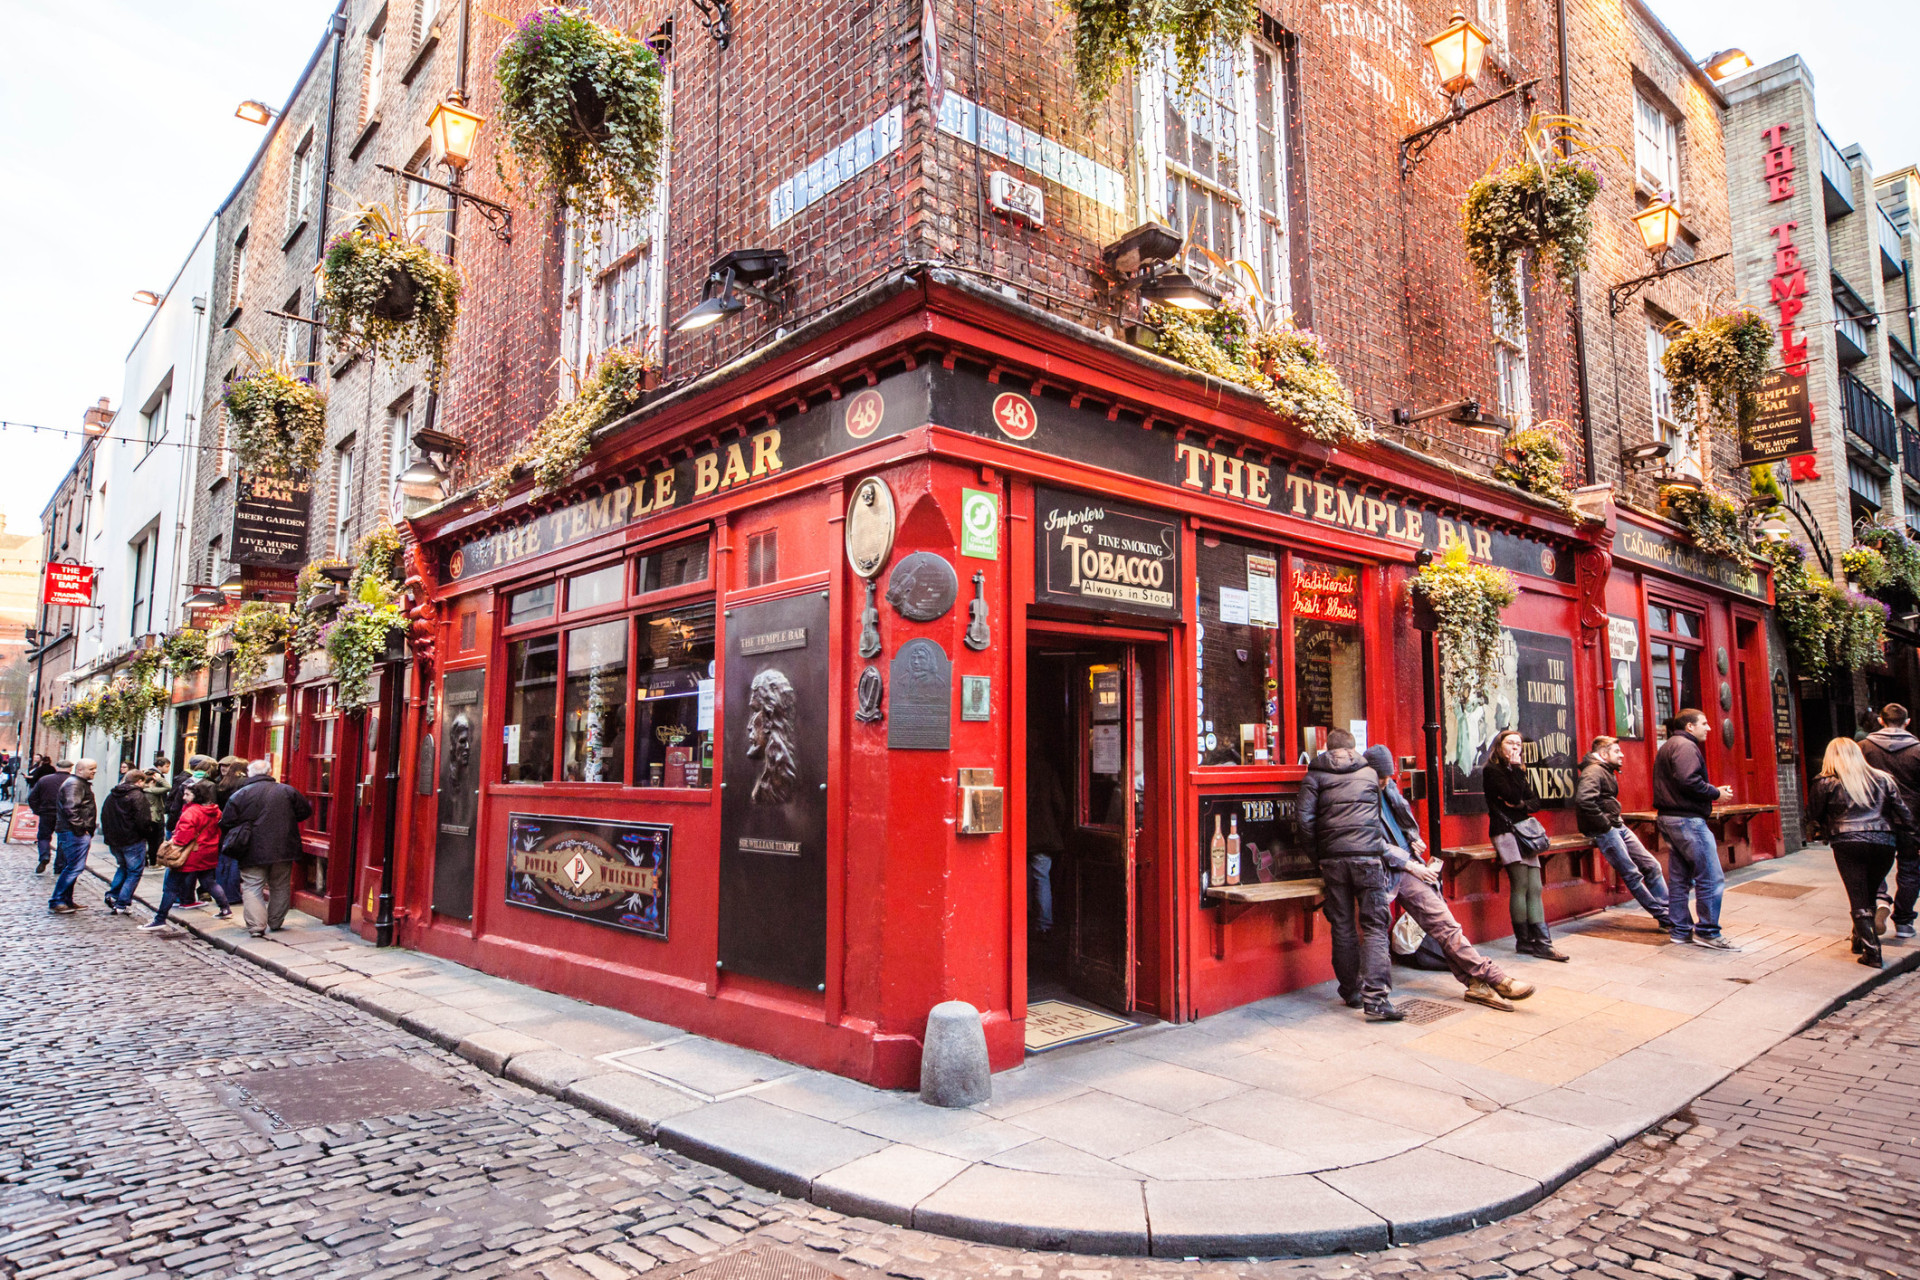 Think fun Irish pubs and people. Then think Guinness, and lots of it. The Irish capital's pub culture is next level and worth the experience.